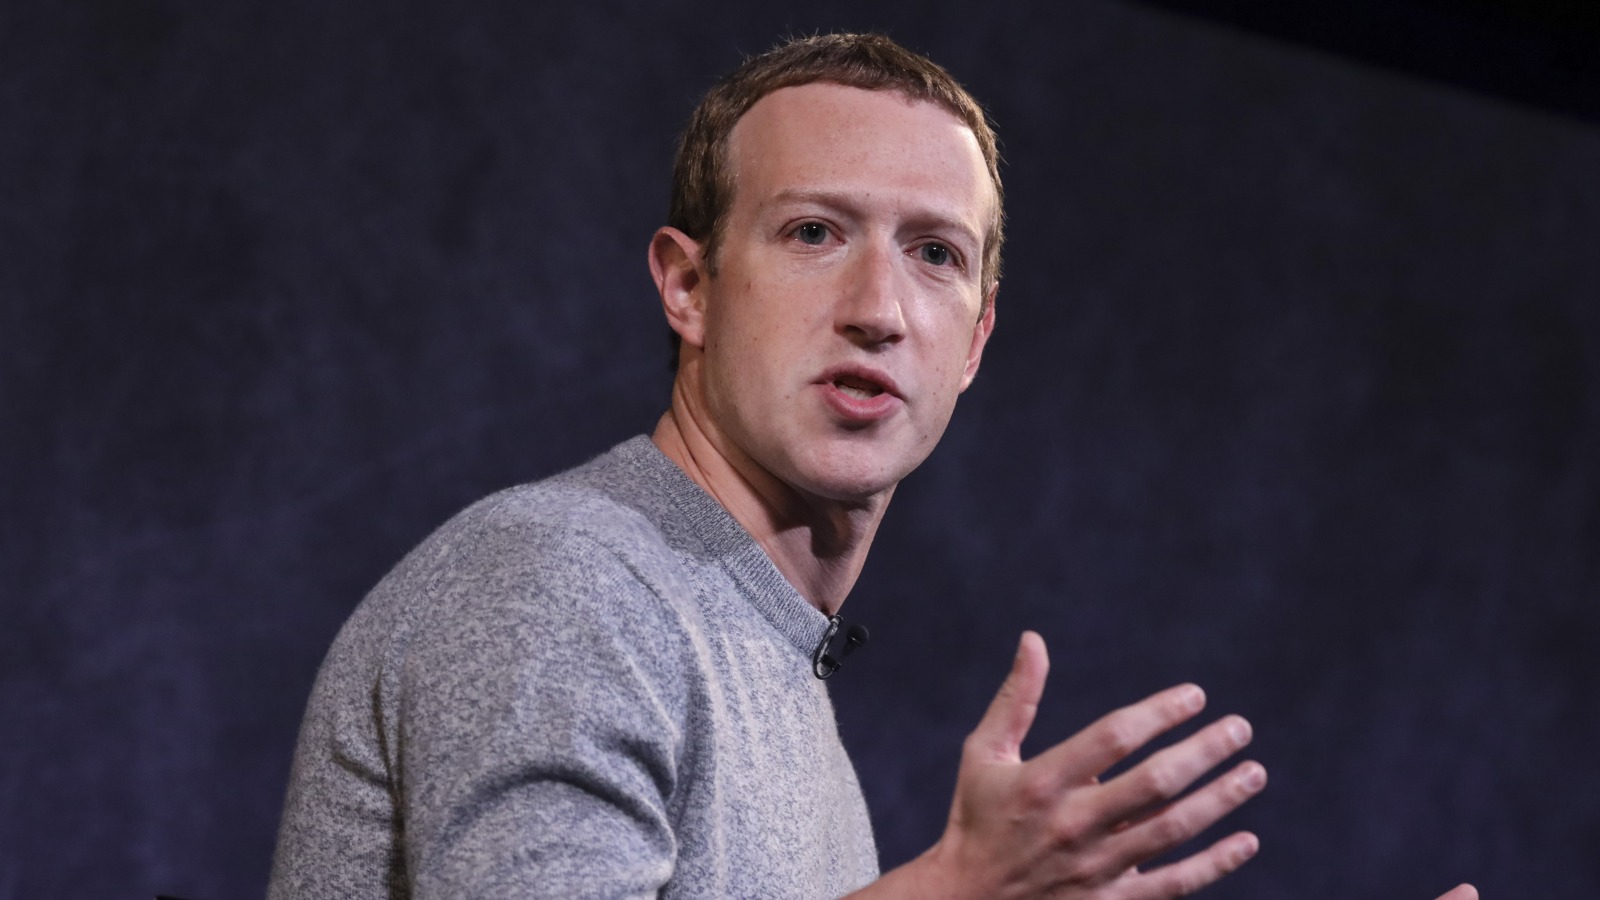 Mark Zuckerberg's Net Worth Is Even Higher Than You Think